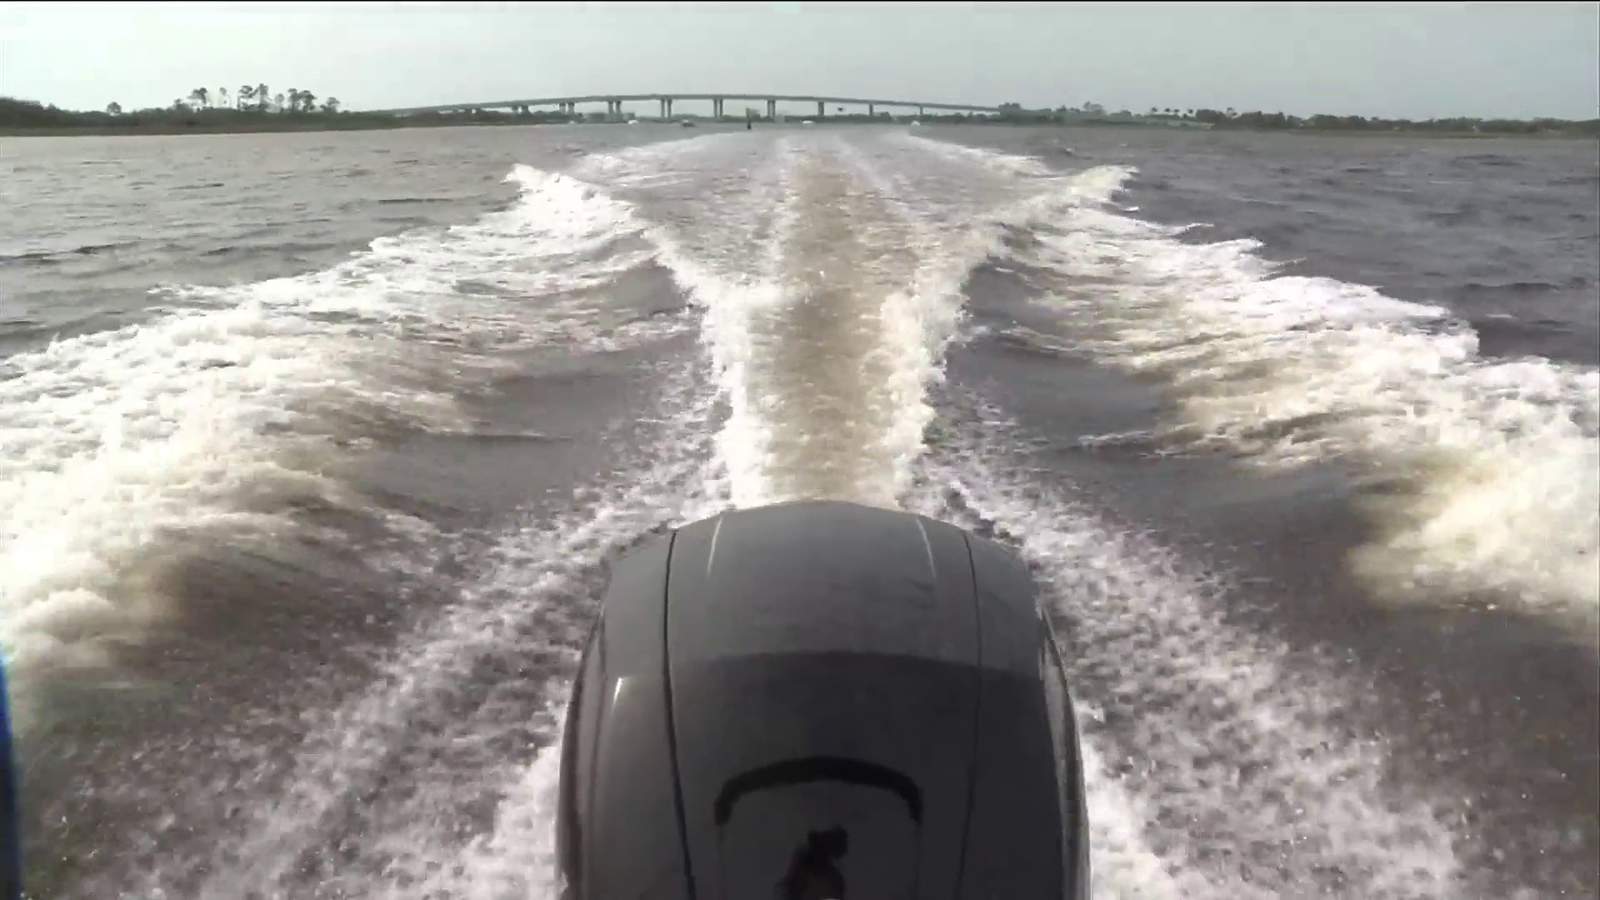 Boat captains stress safety ahead of Jacksonville Boat Show